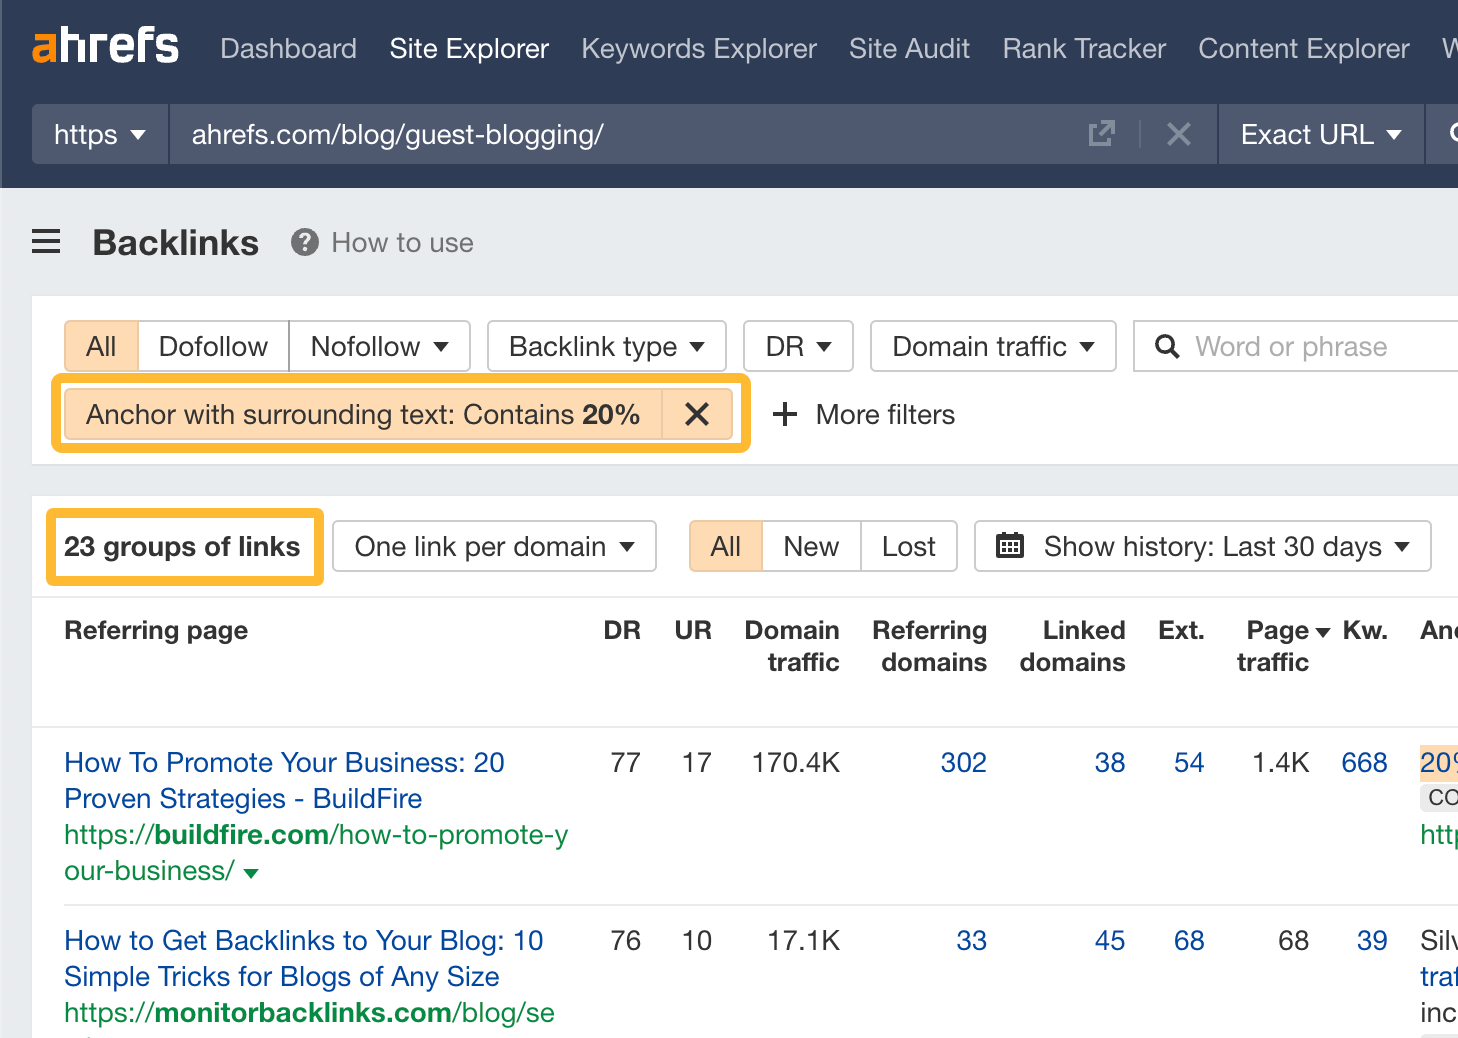 23 websites linked to our page because of a statistic we included on the page. Data via Ahrefs' Site Explorer
